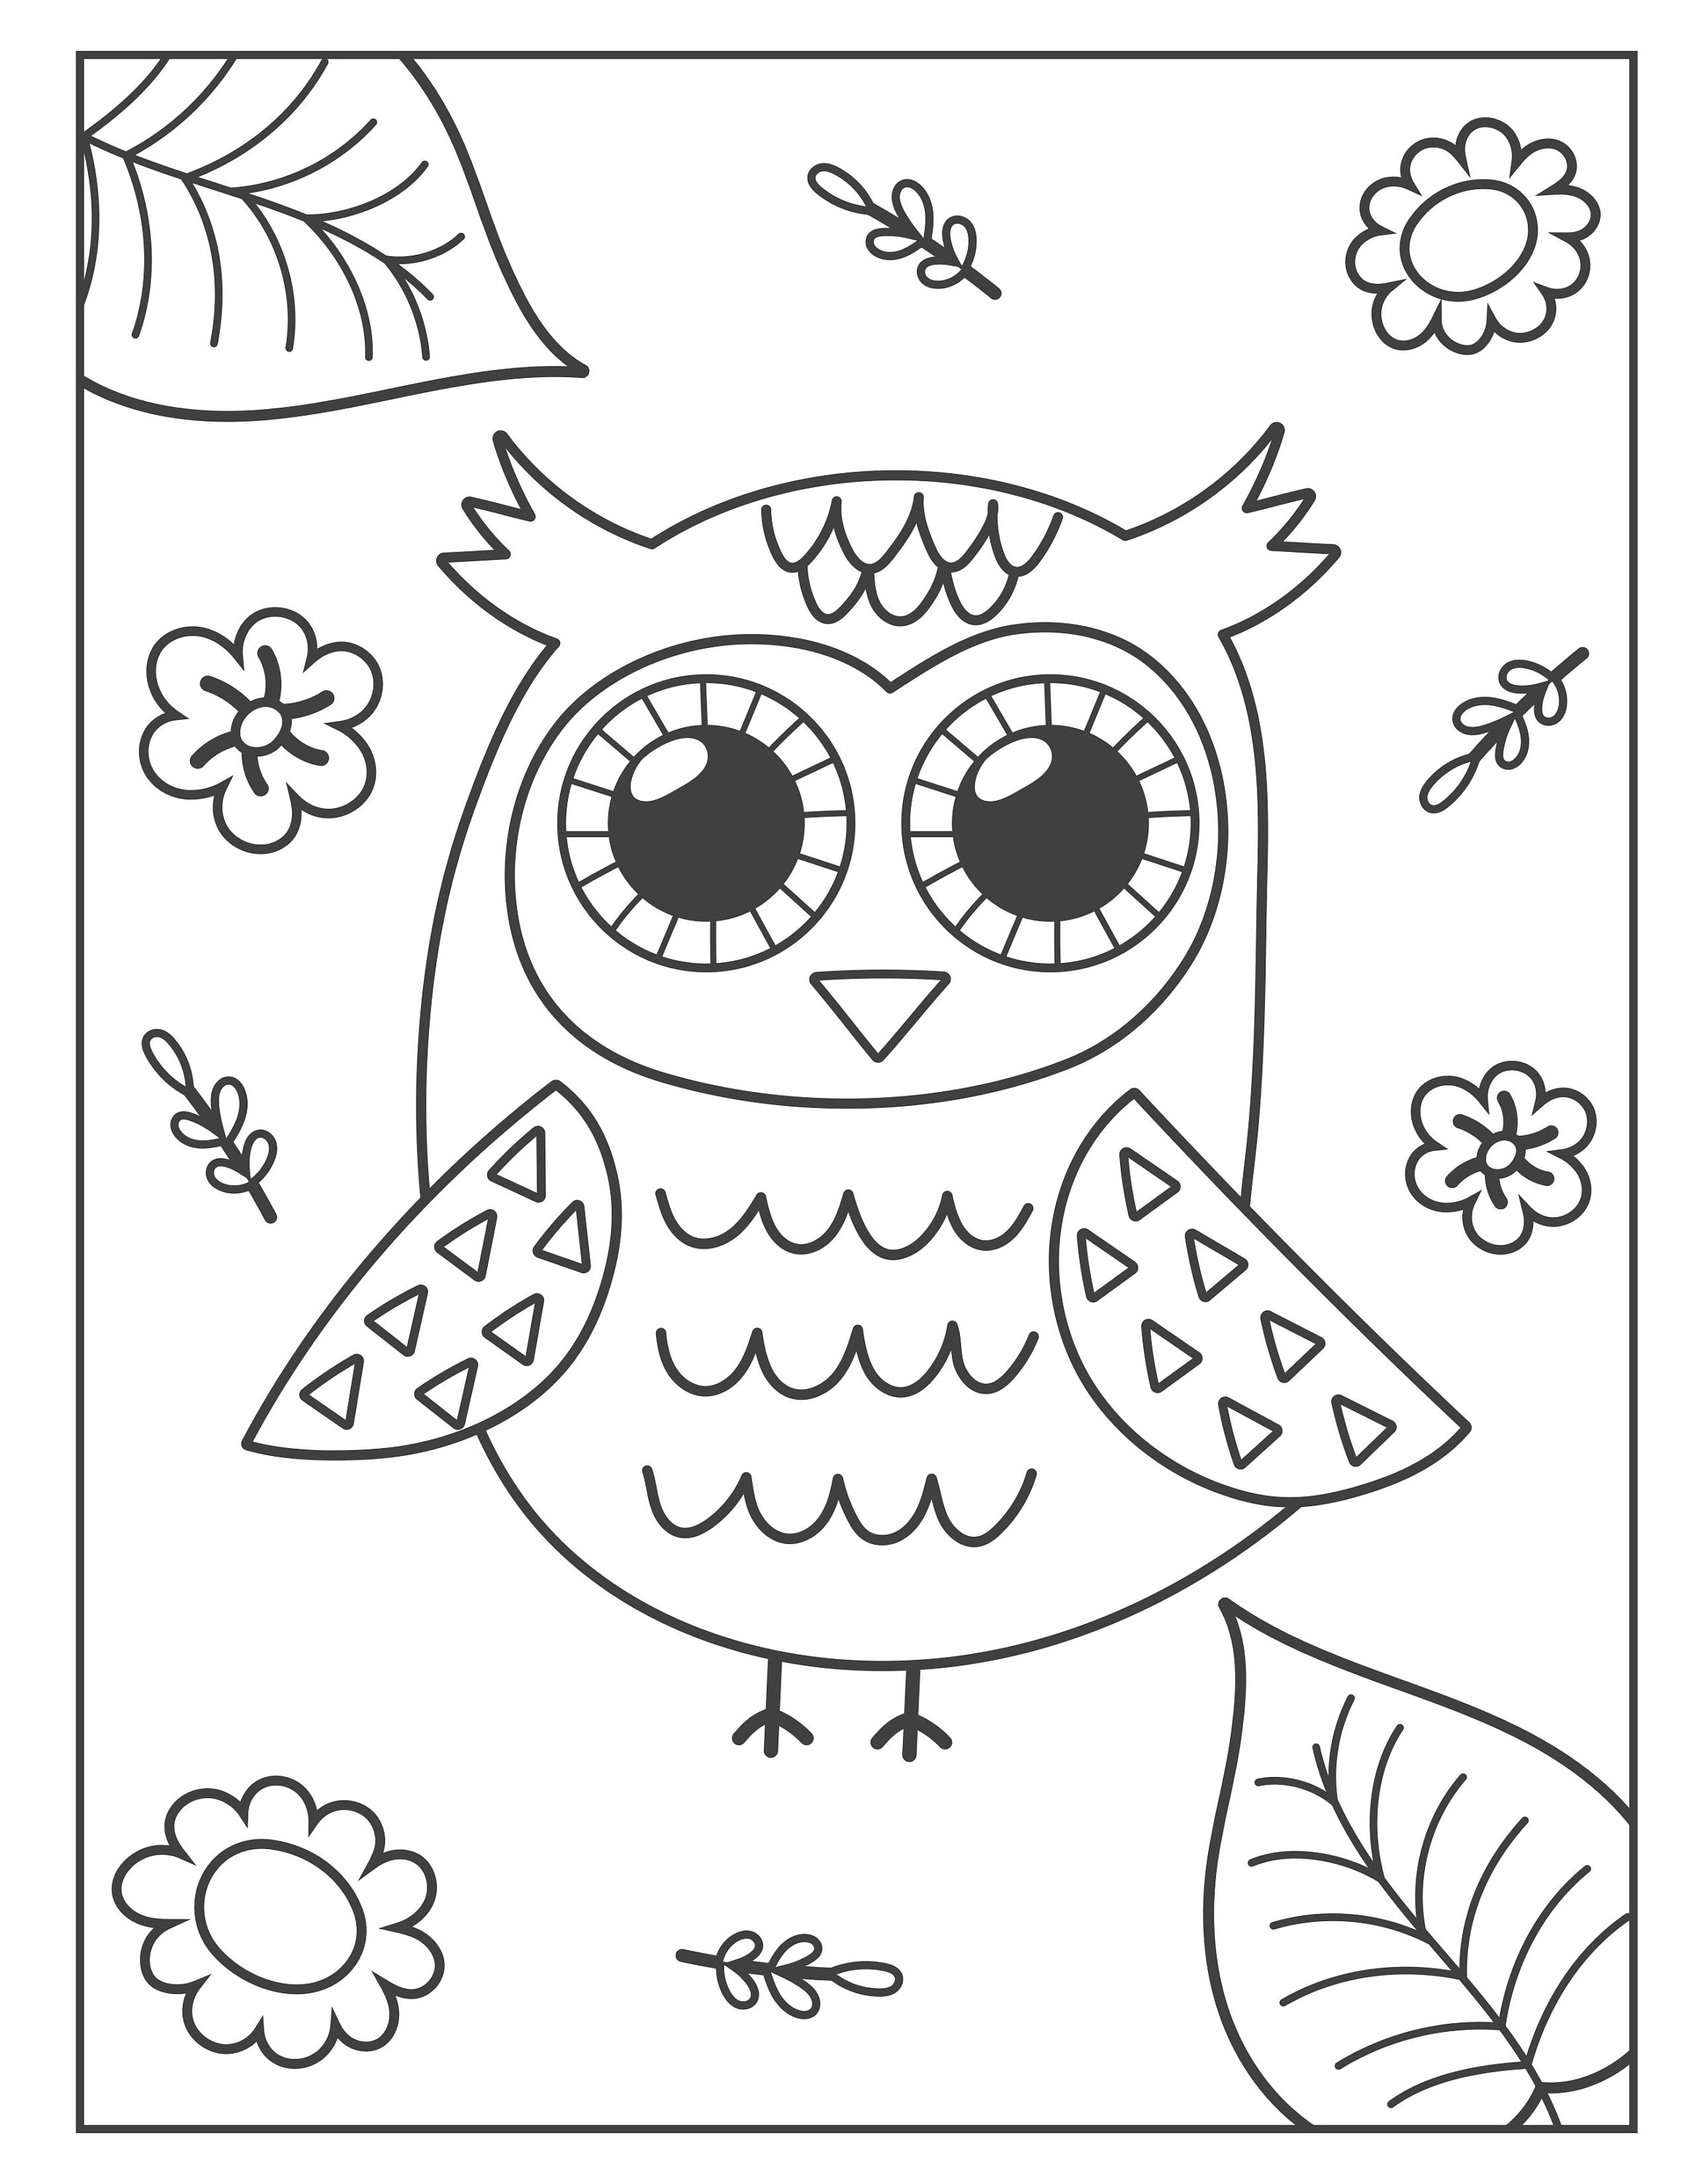 Cute owl coloring pagesinstant download pagesfor kids